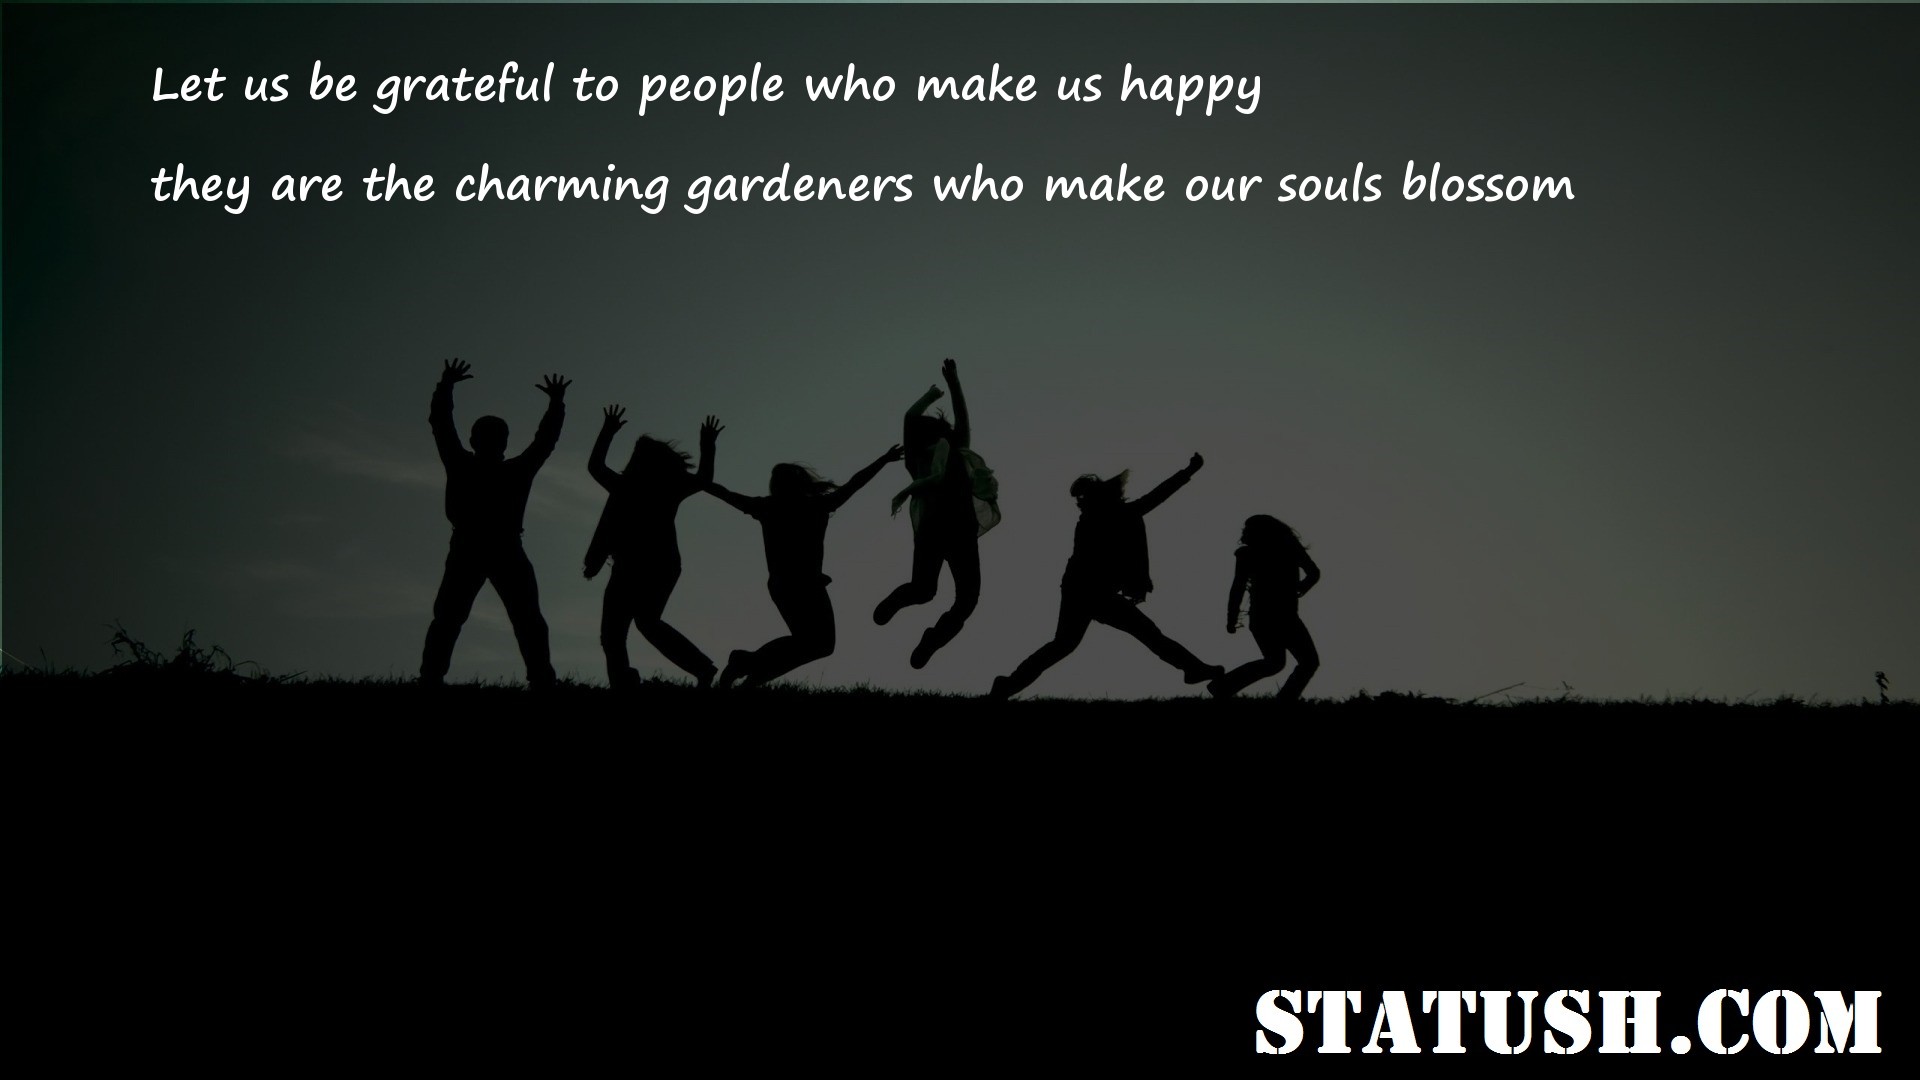 Let us be grateful to people who make us happy Friendship Quotes at statush.com